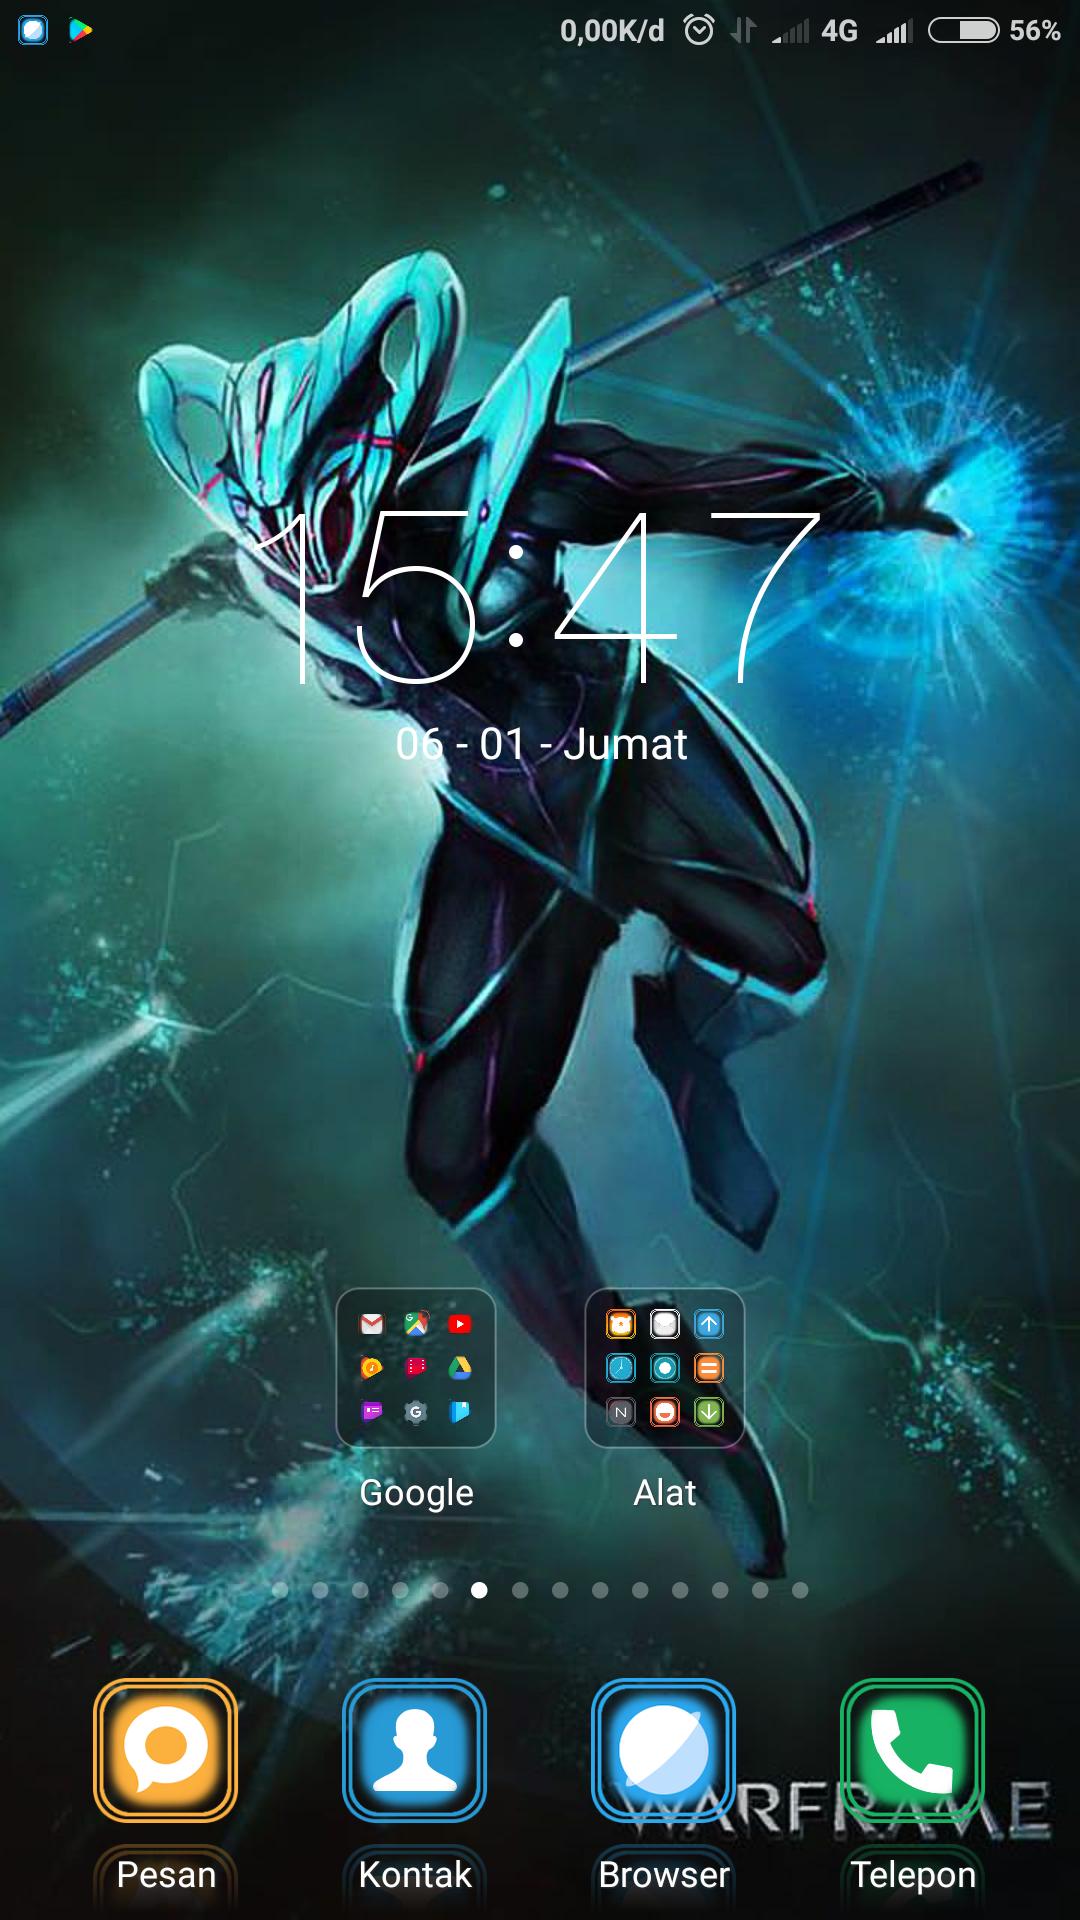 Warframe Wallpaper Hd For Android Apk Download